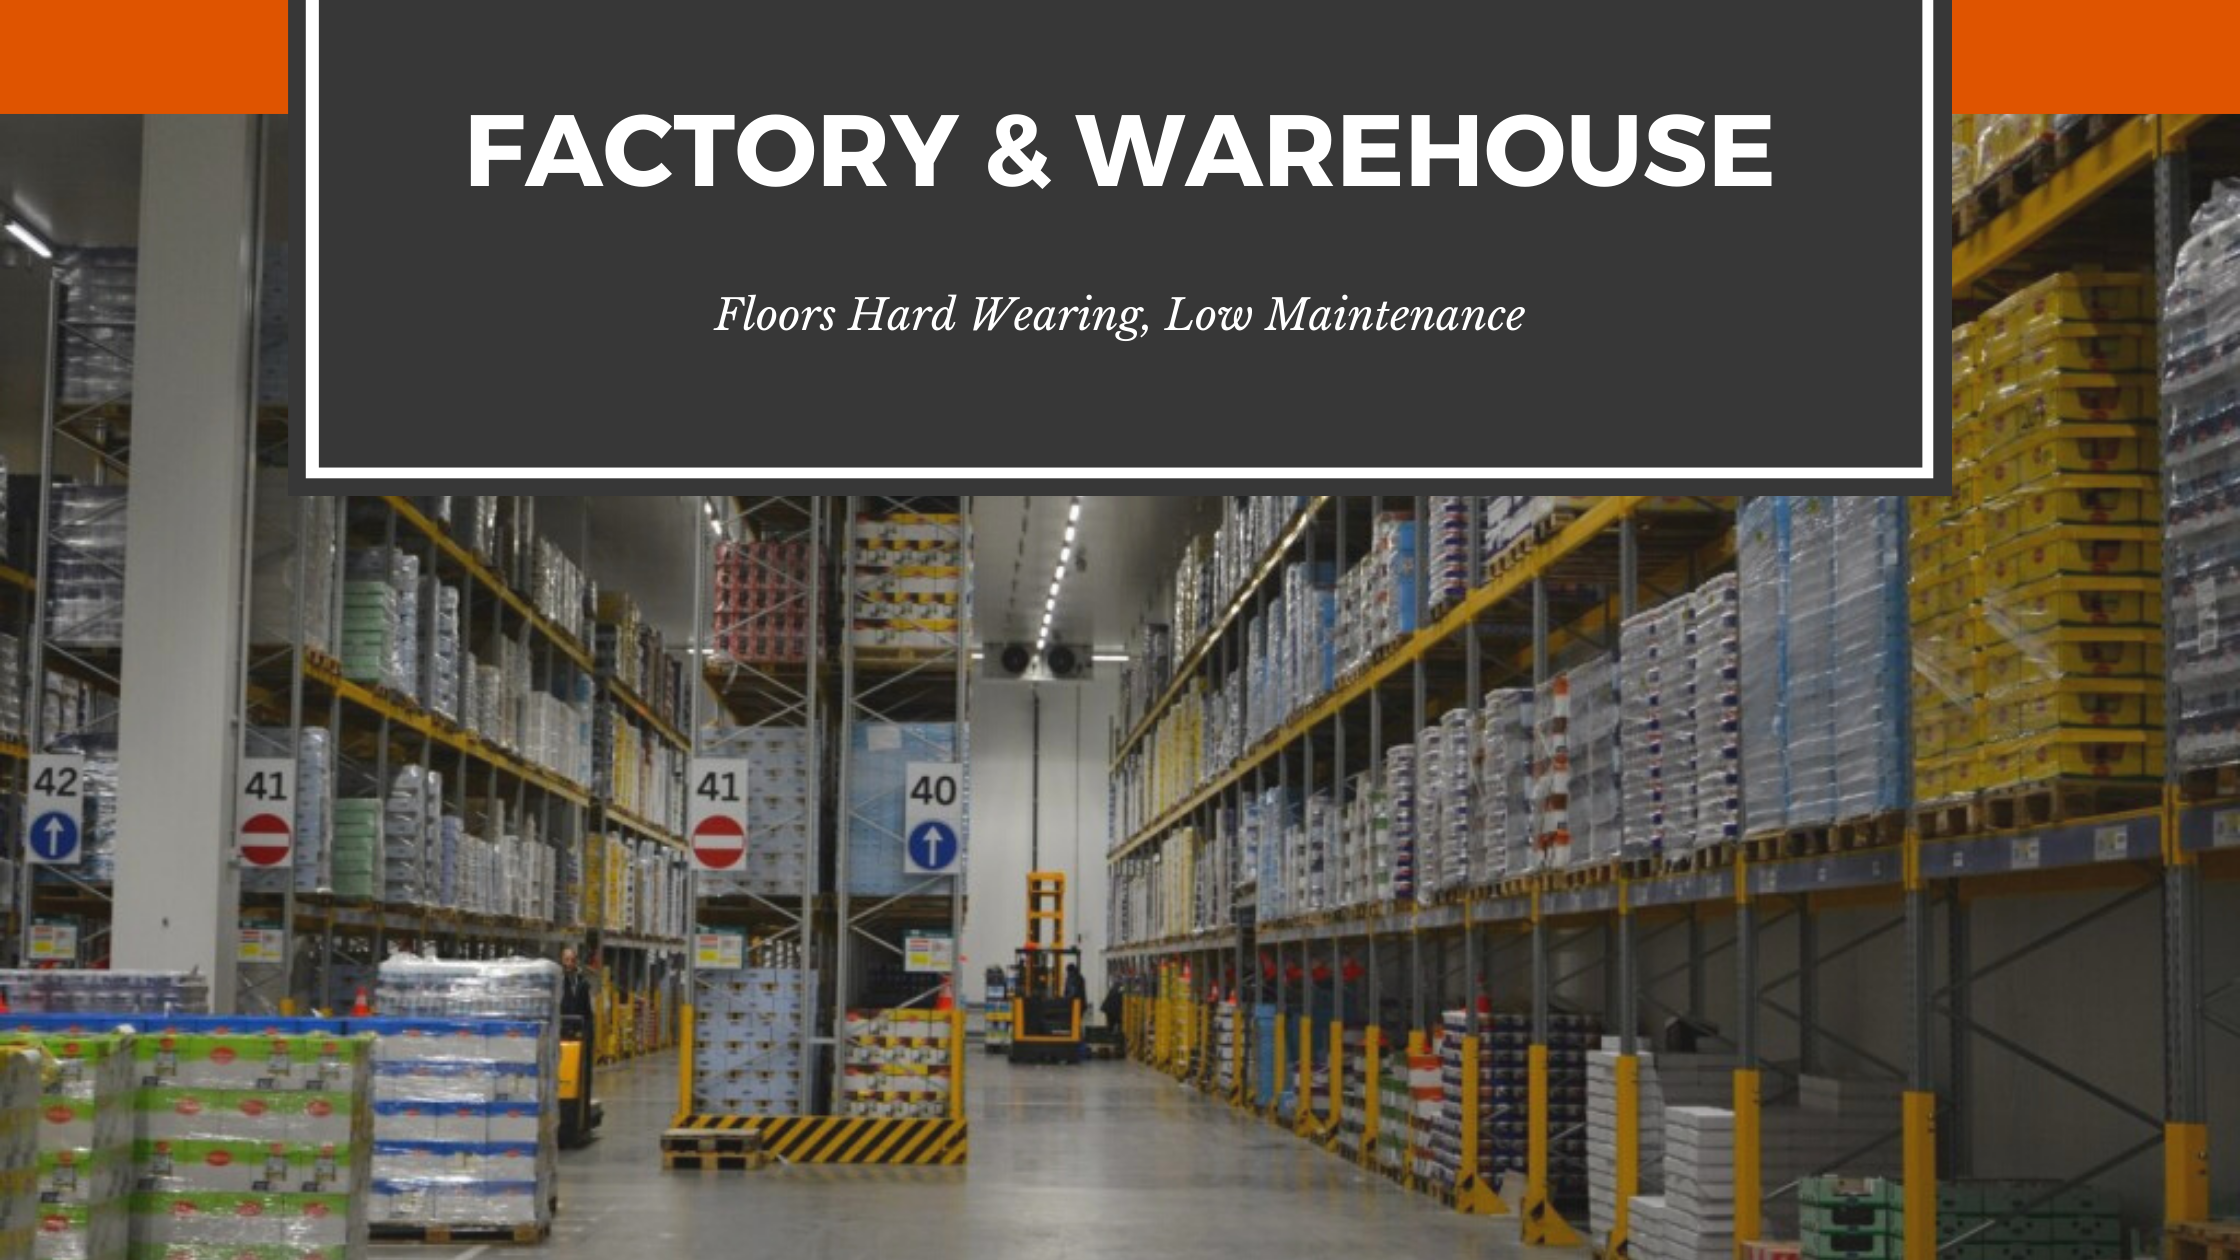 FACTORY & WAREHOUSE